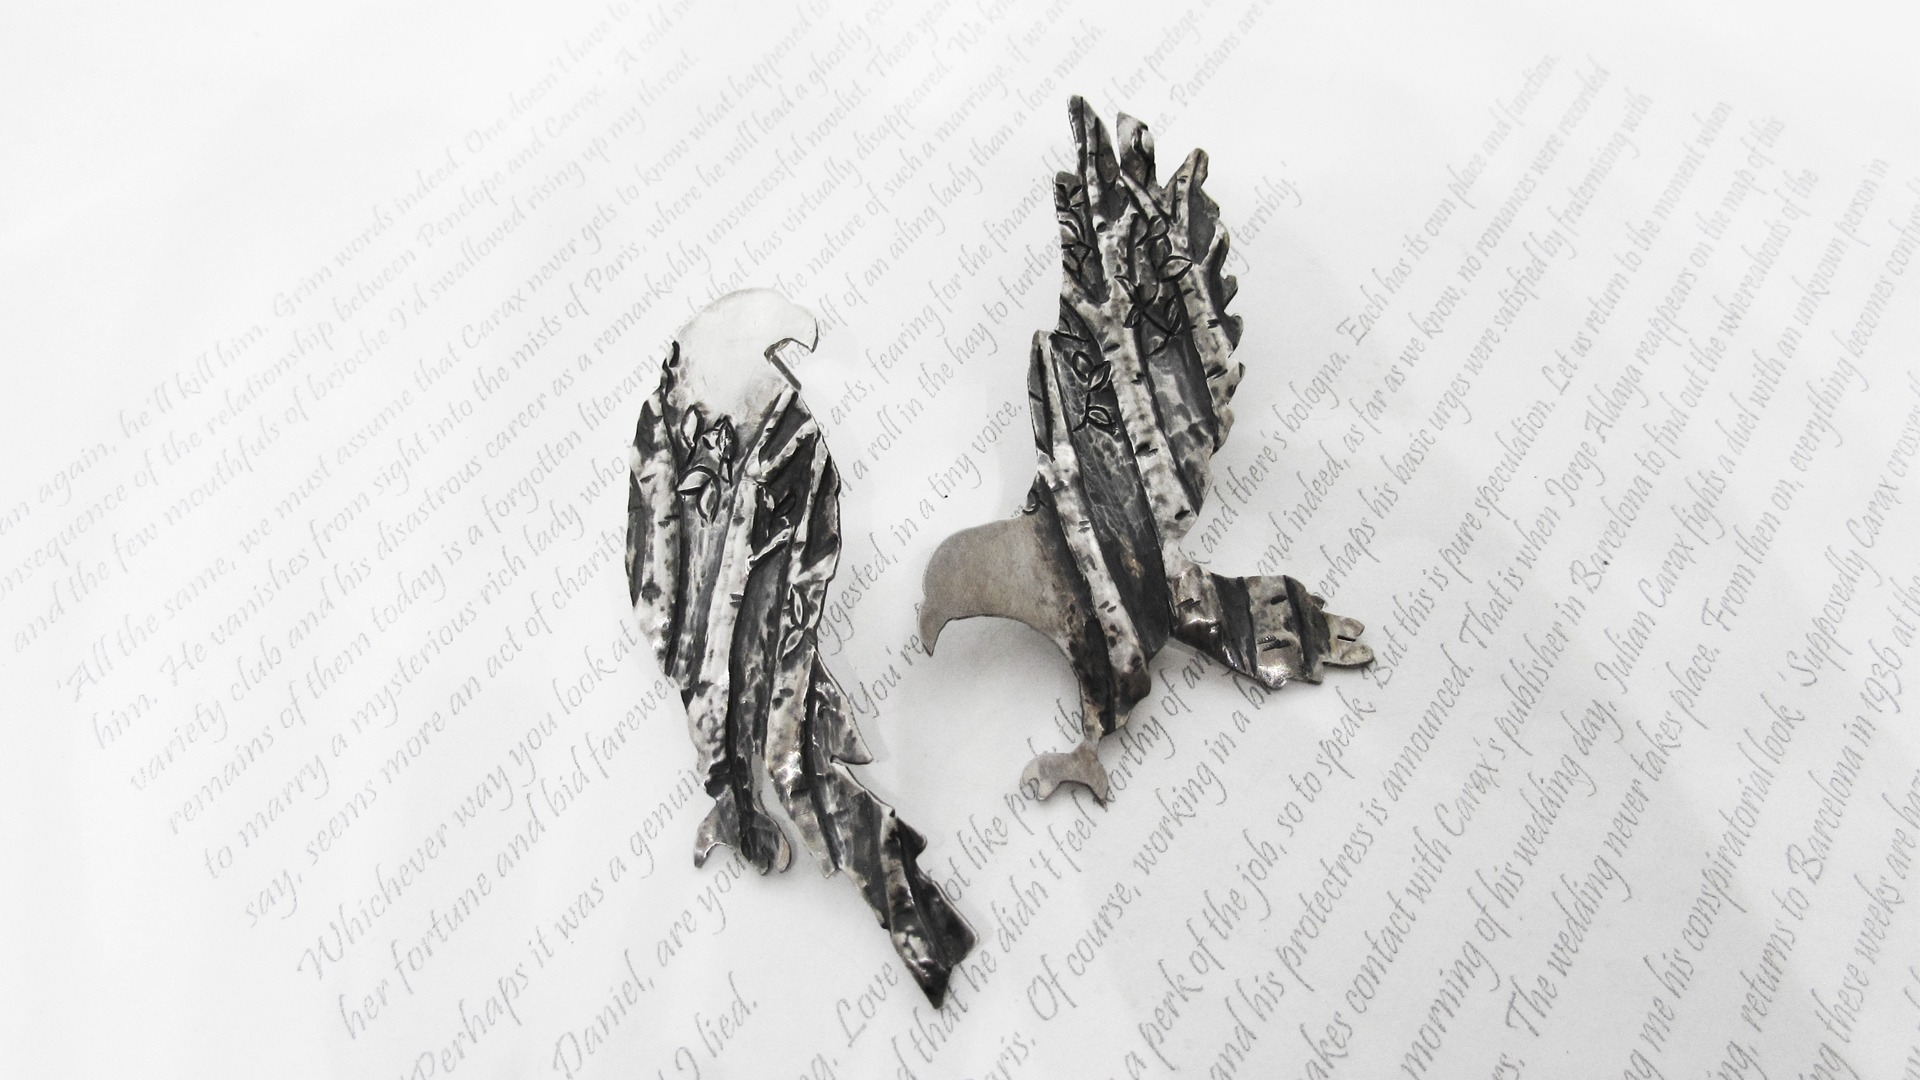 Eagles are made using sterling silver. The dimensional details are added by chasing and repoussé technique